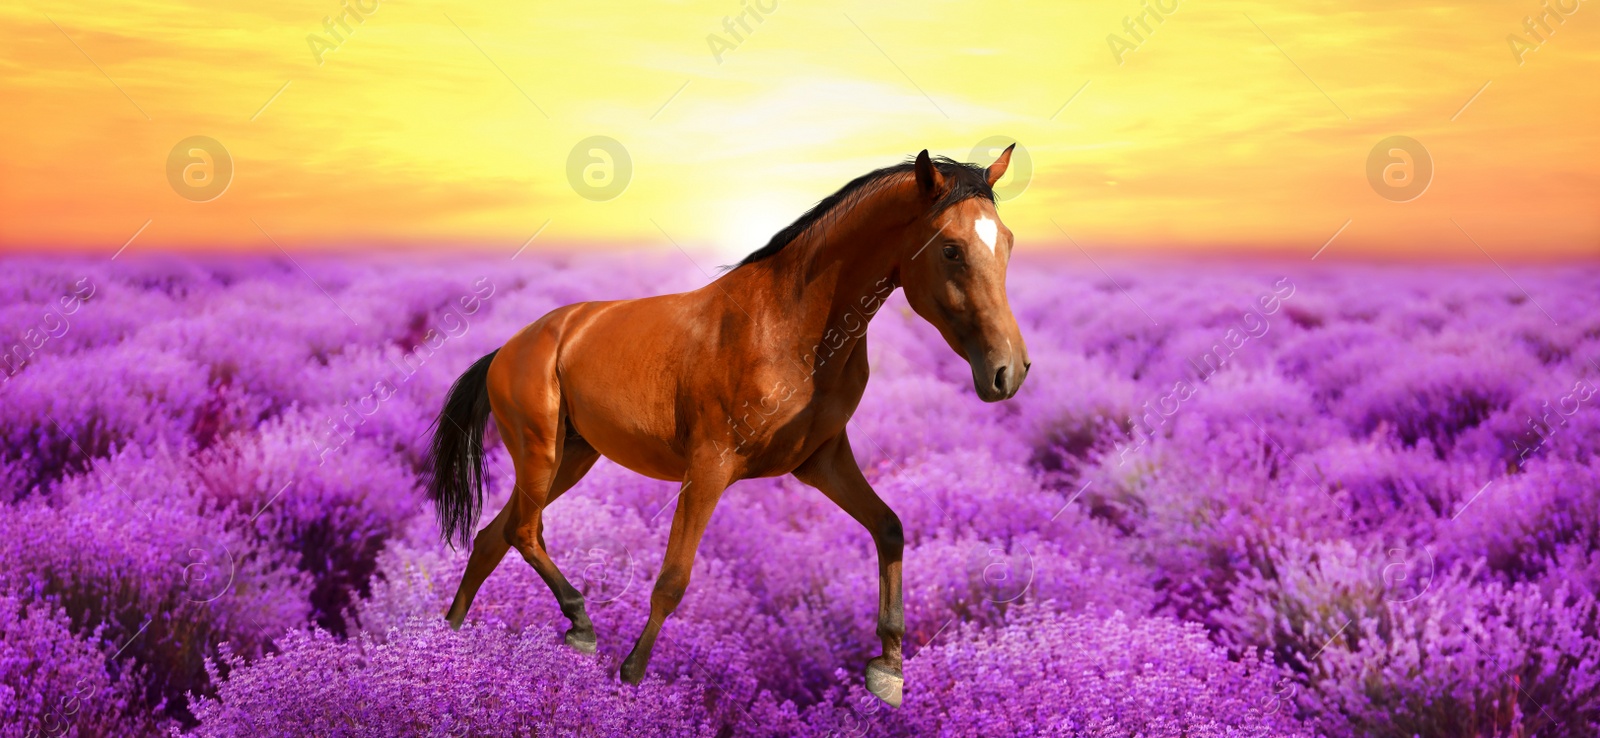 Image of Beautiful horse running in lavender field at sunset. Banner design